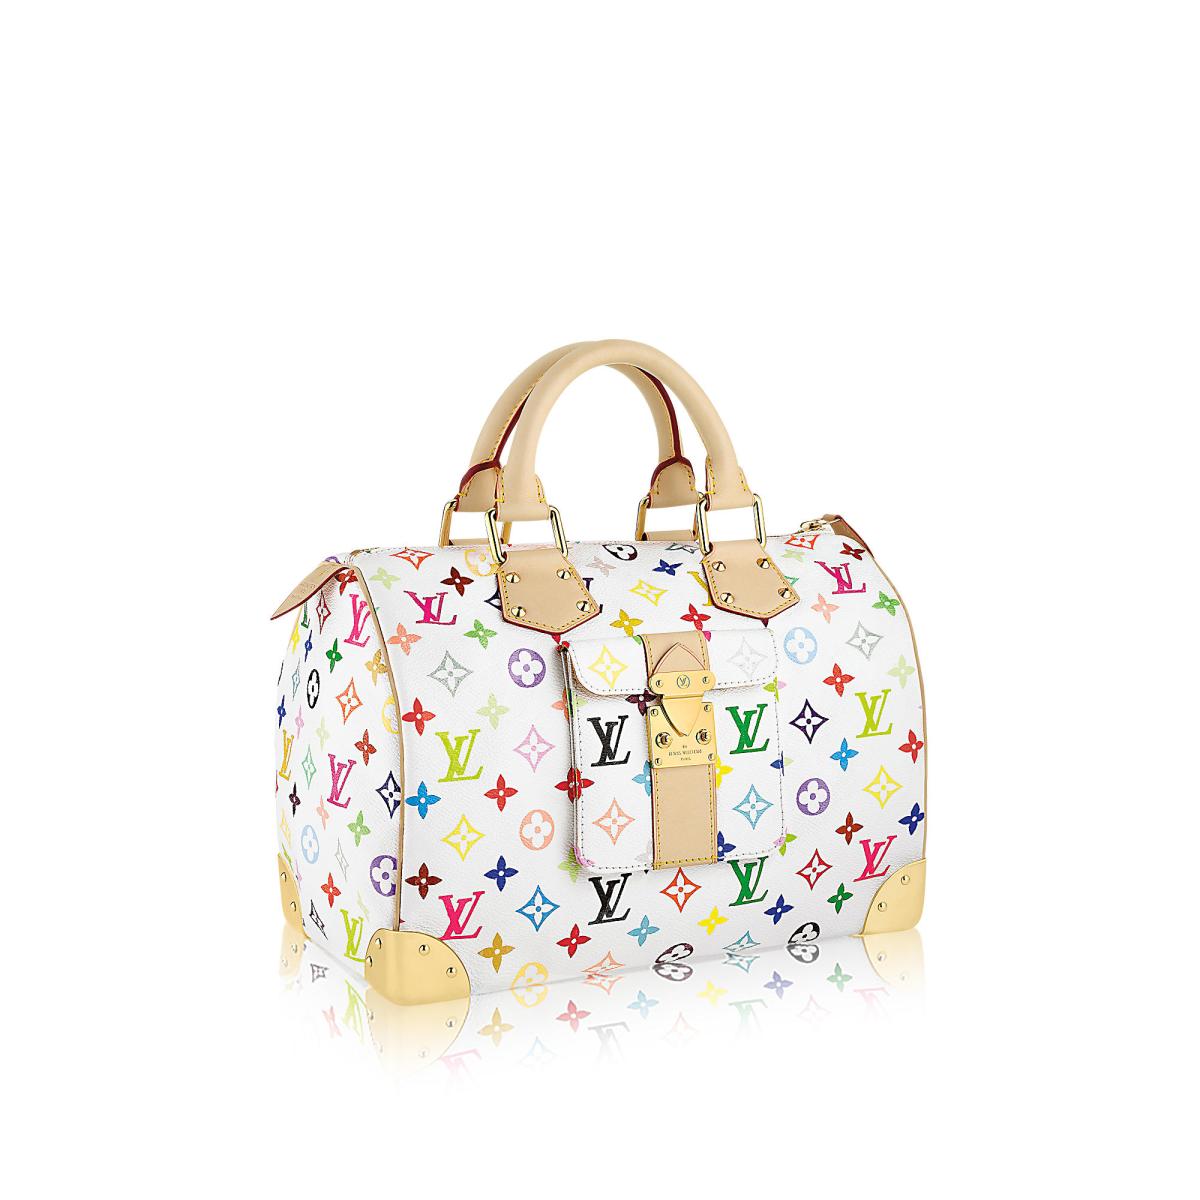 Louis Vuitton Discontinues Multi-Colour Monogram Collection – Life with Ivy